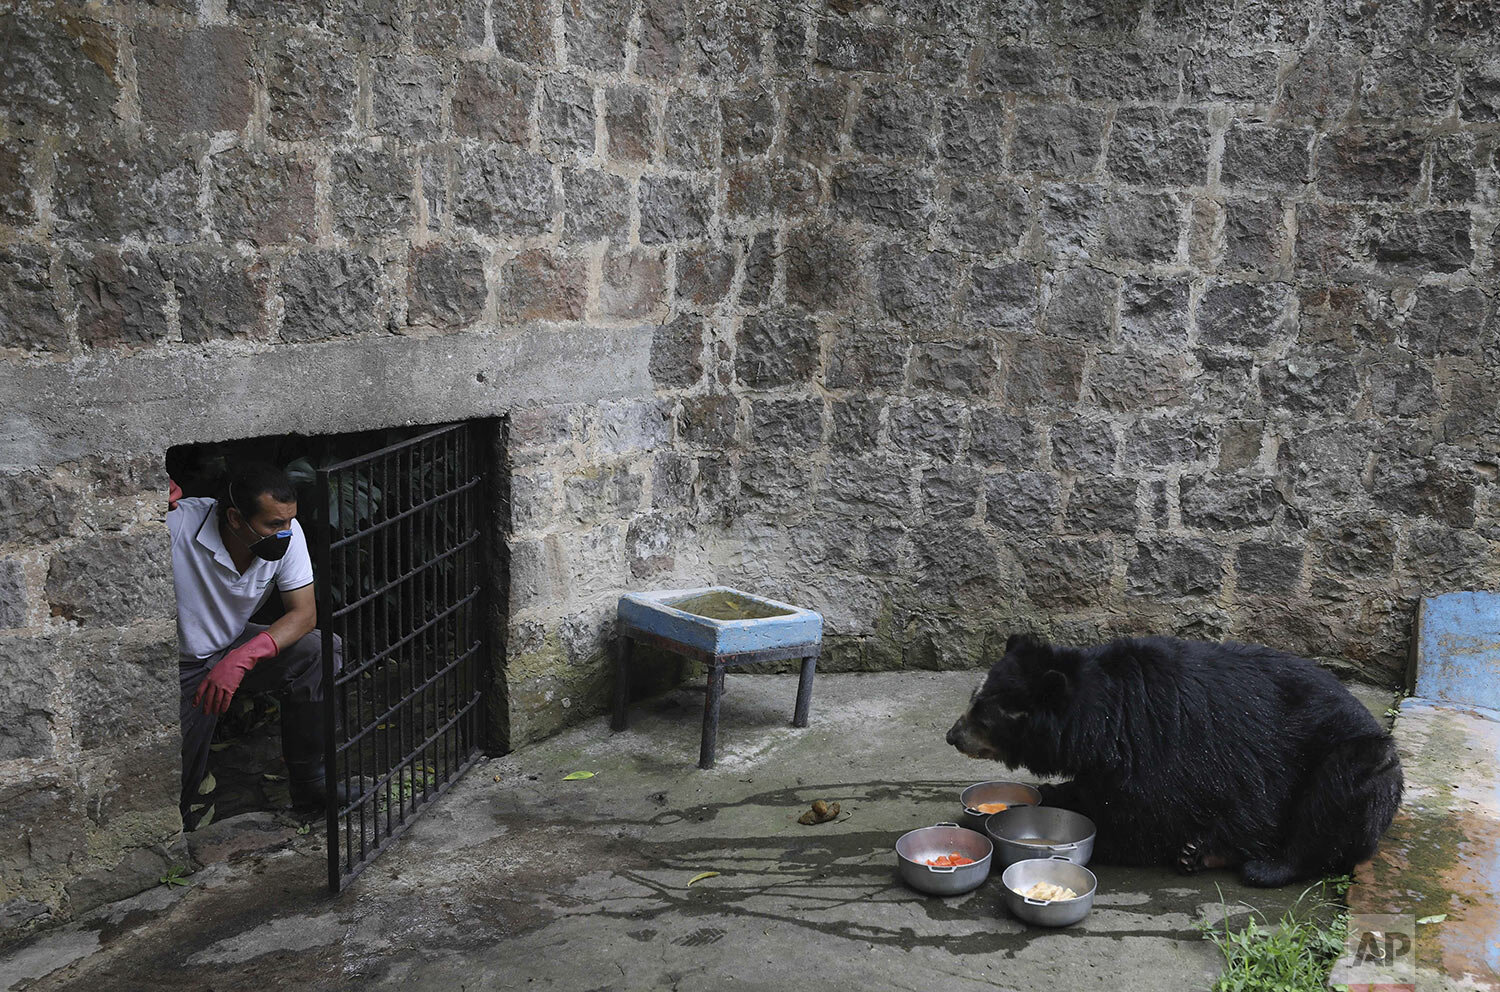  Zookeeper Edilberto Quevedo watches a spectacled bear after placing food at the Santacruz Zoo which is closed amid a lockdown to help contain the spread of the new coronavirus in San Antonio, near Bogota, Colombia, Tuesday, April 21, 2020. The zoo d